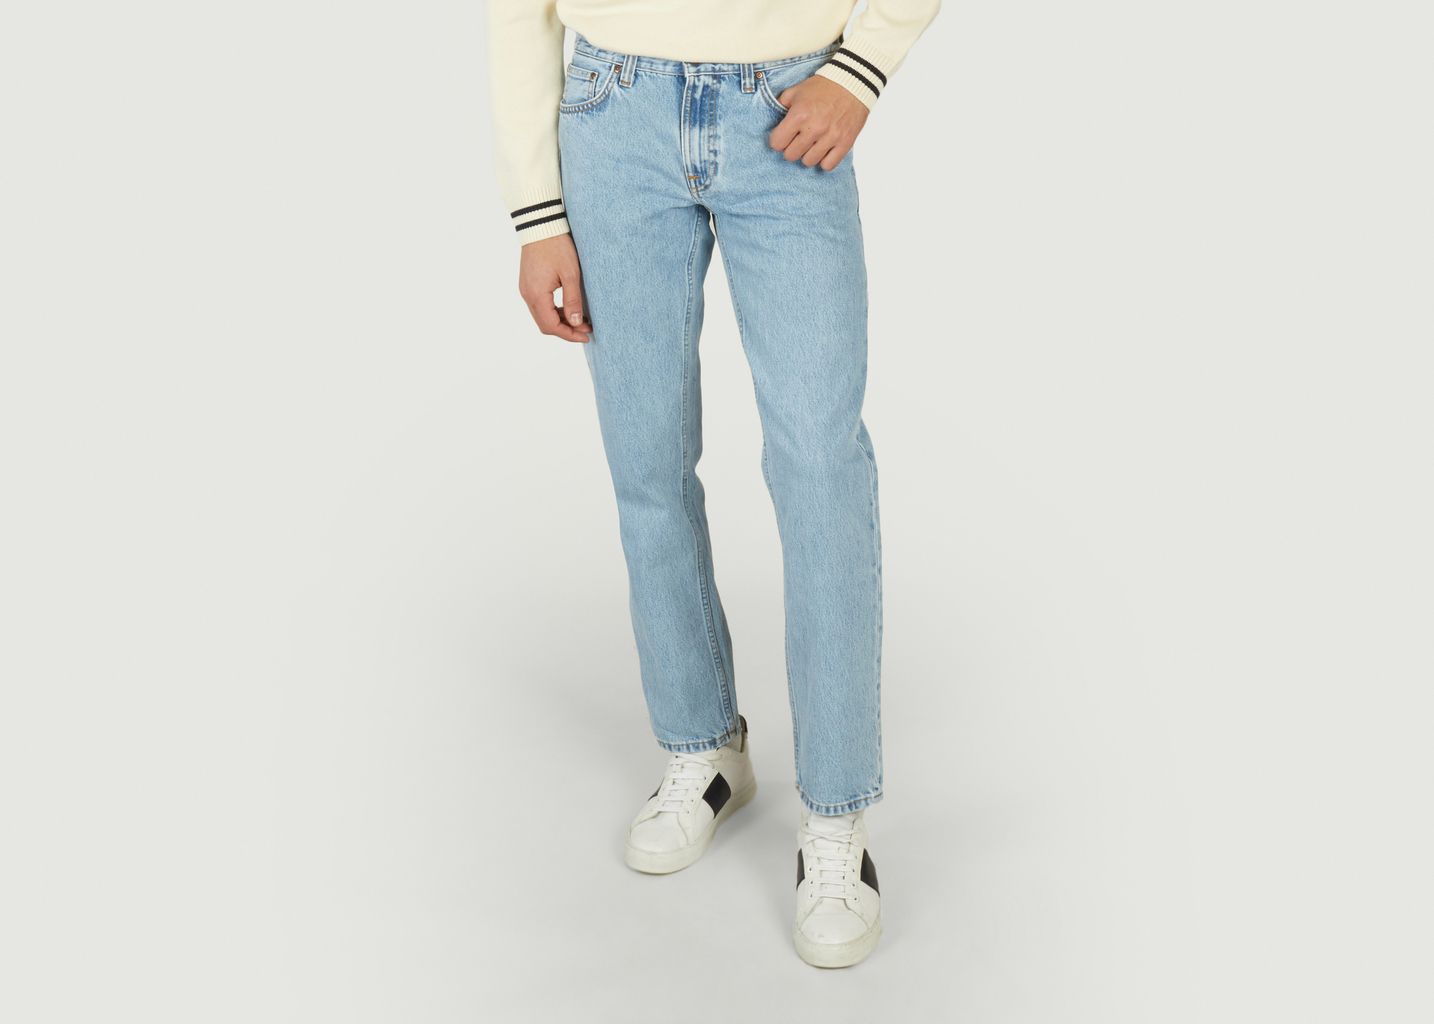 Jeans Gritty Jackson - Nudie Jeans